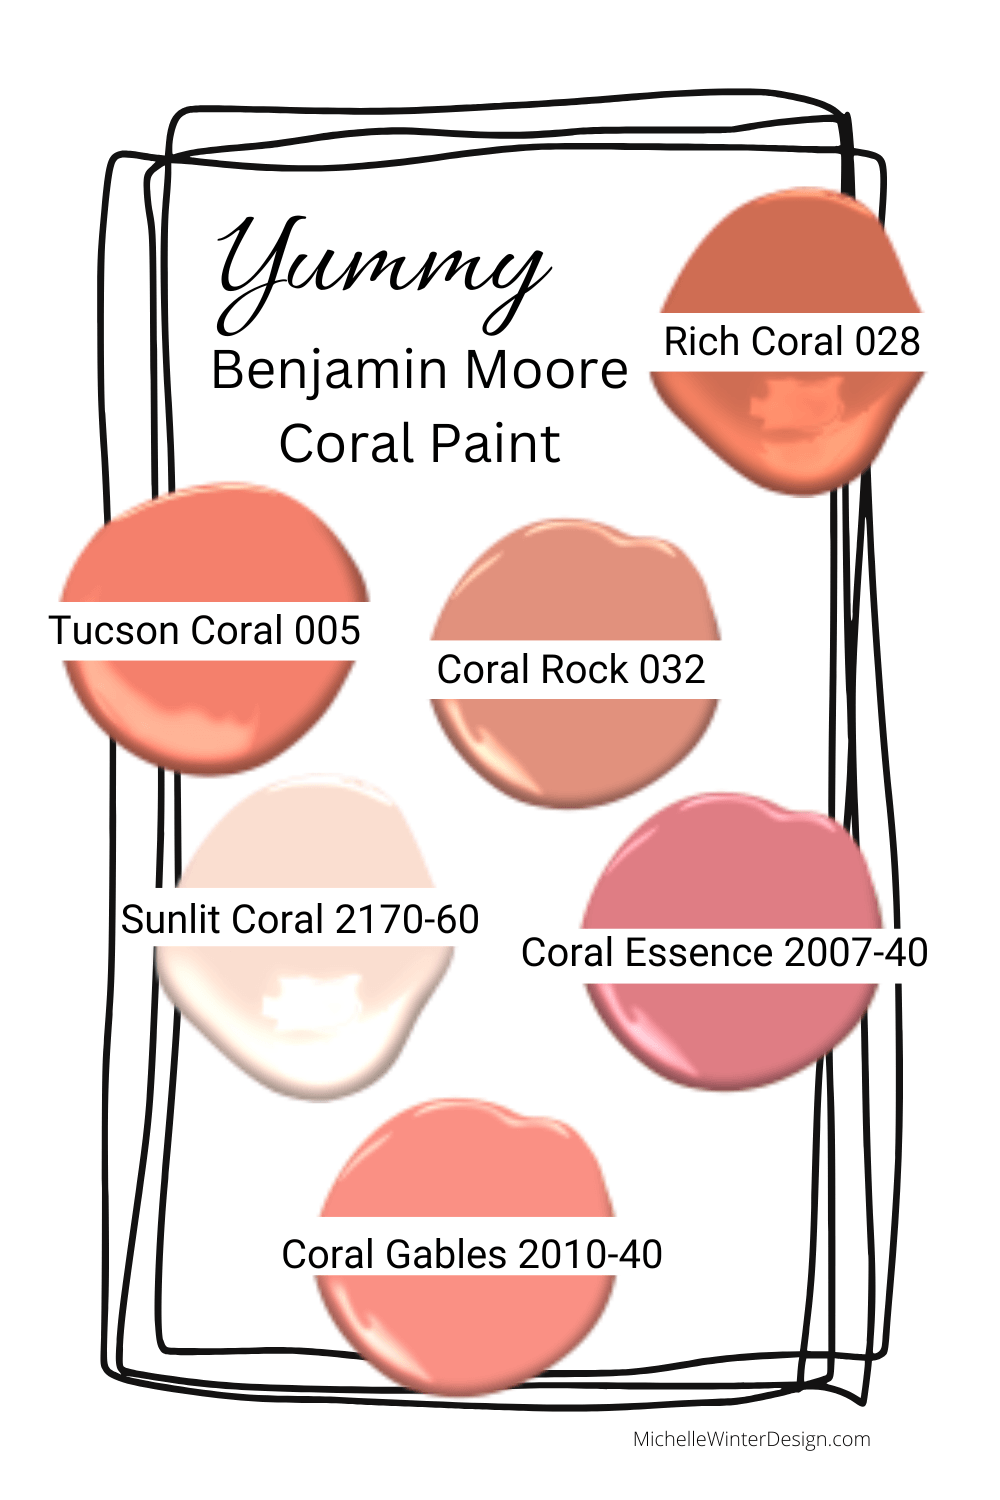 A variety of coral colored paint from Benjamin Moore